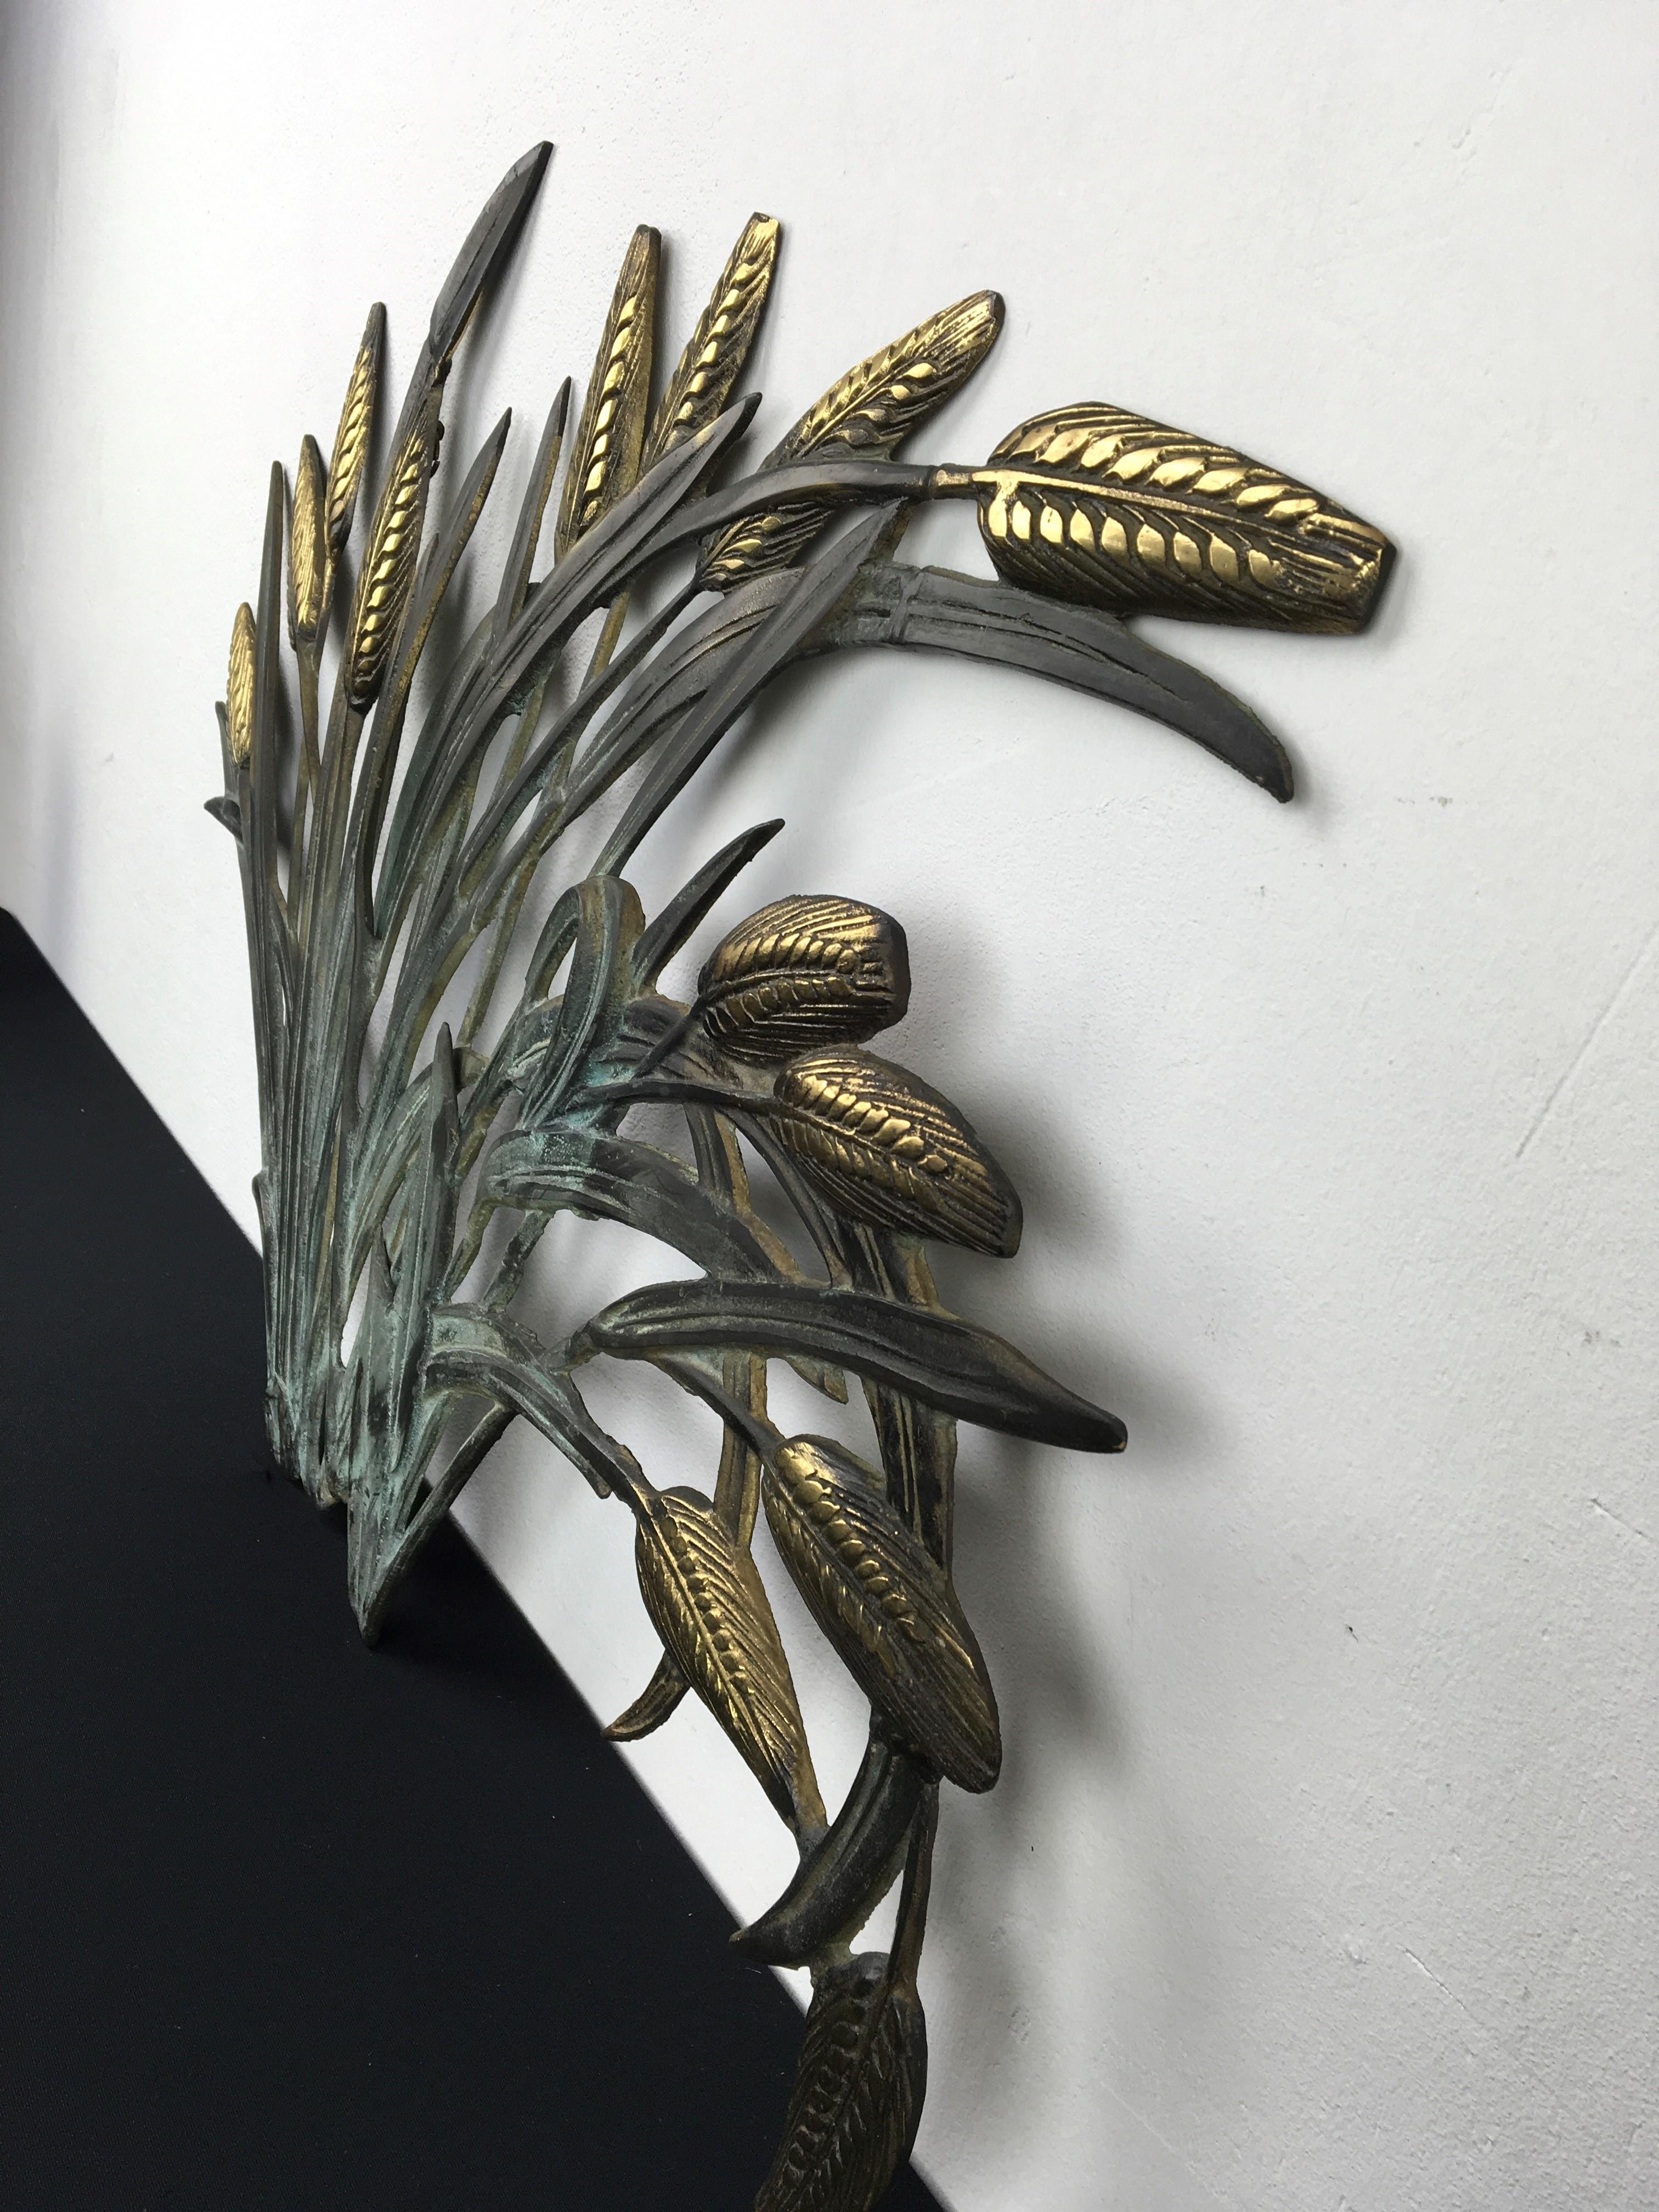 Mid-20th Century Brass Wall Sculpture Wheat Plant, Corn Stalk, 1960s For Sale